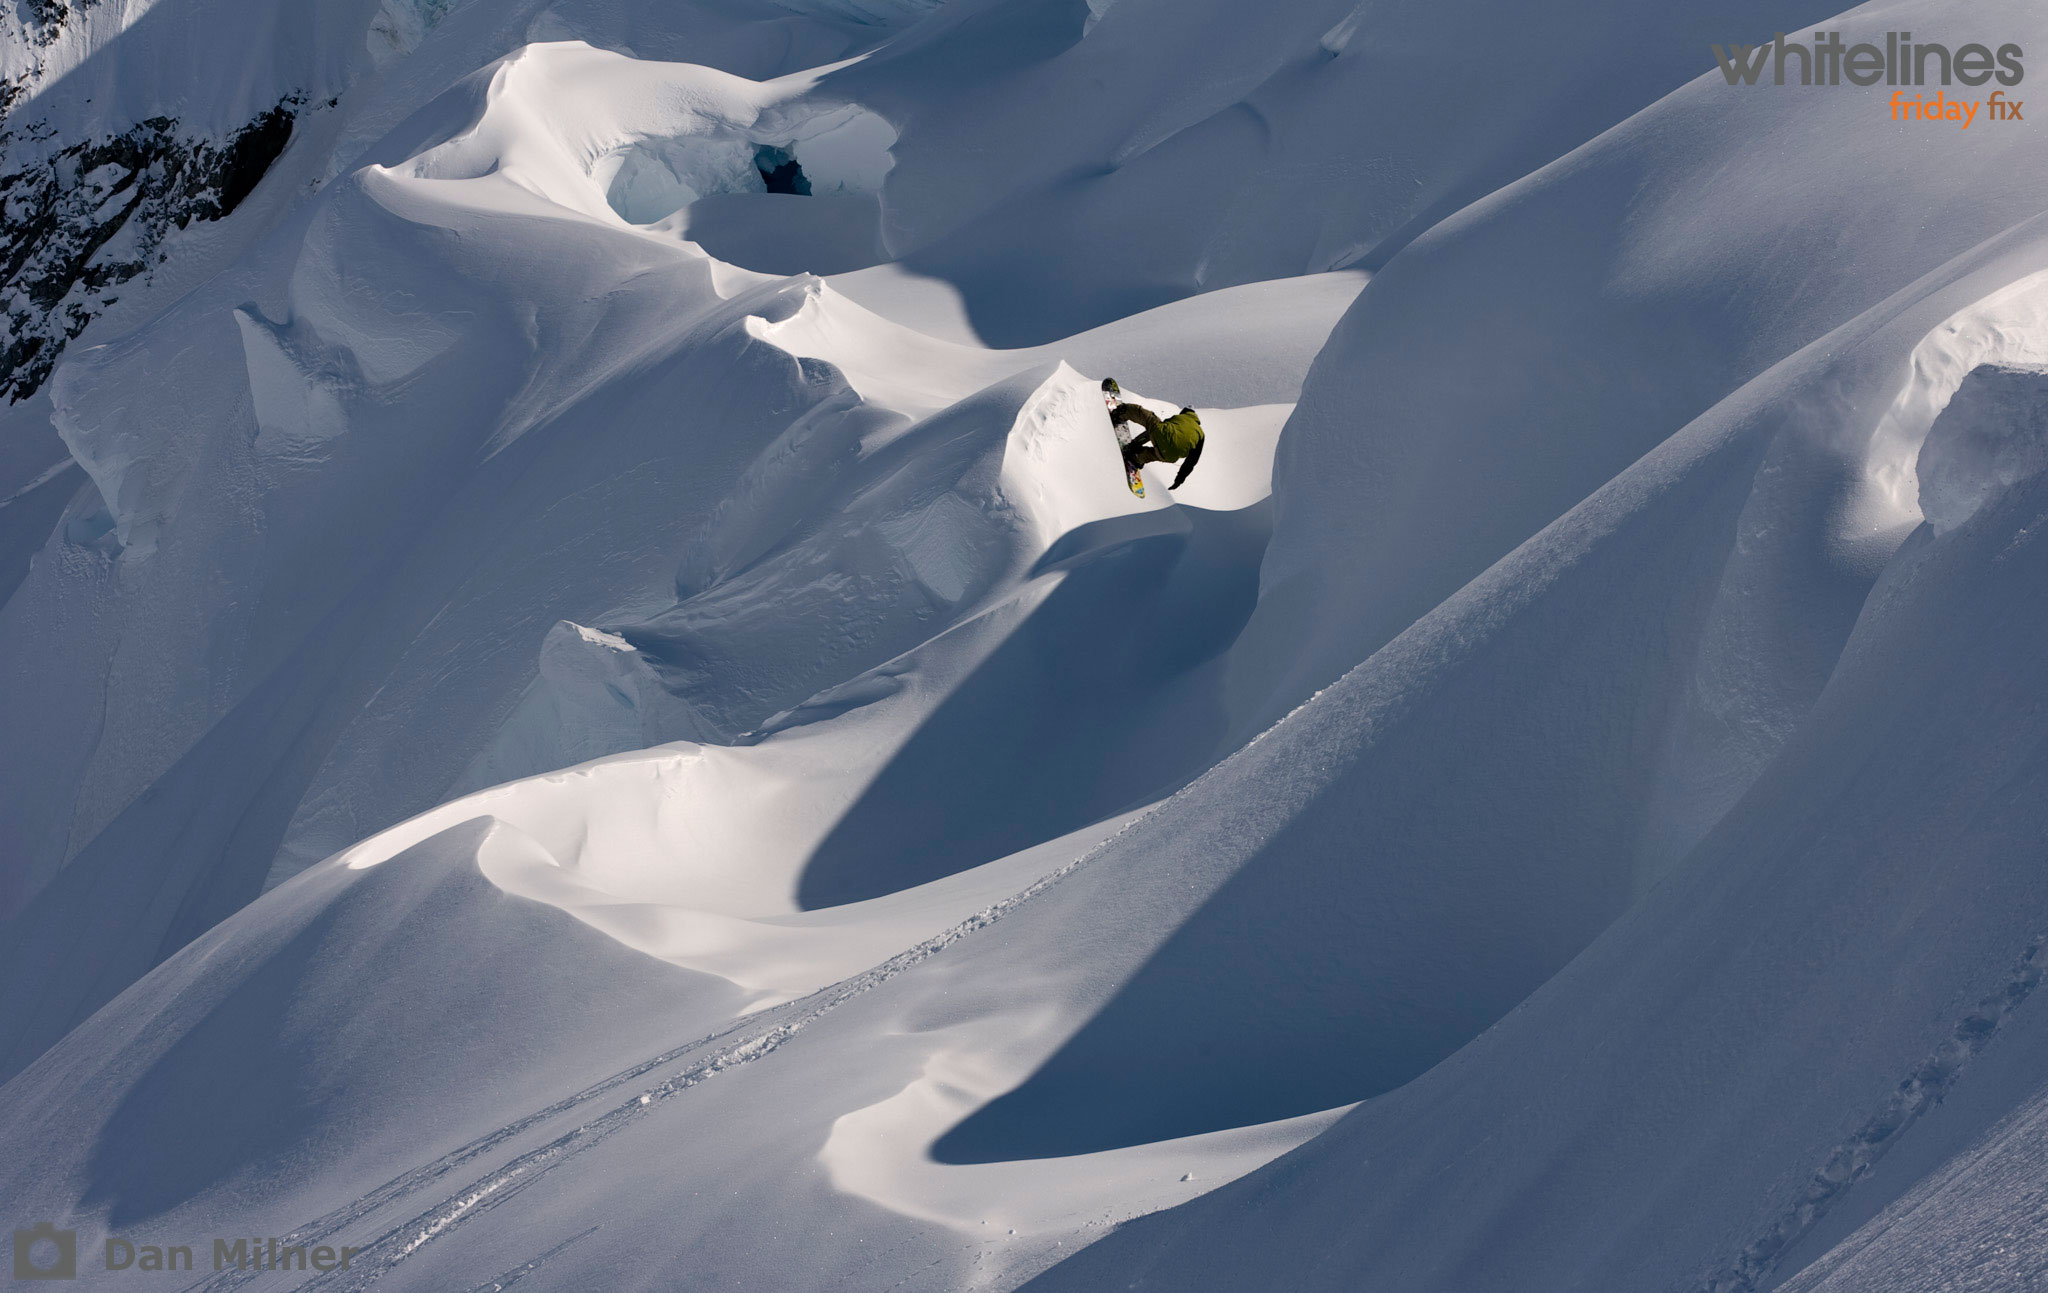 Snowboard Wallpaper Travis Rice Flies In The Ointment Whitelines